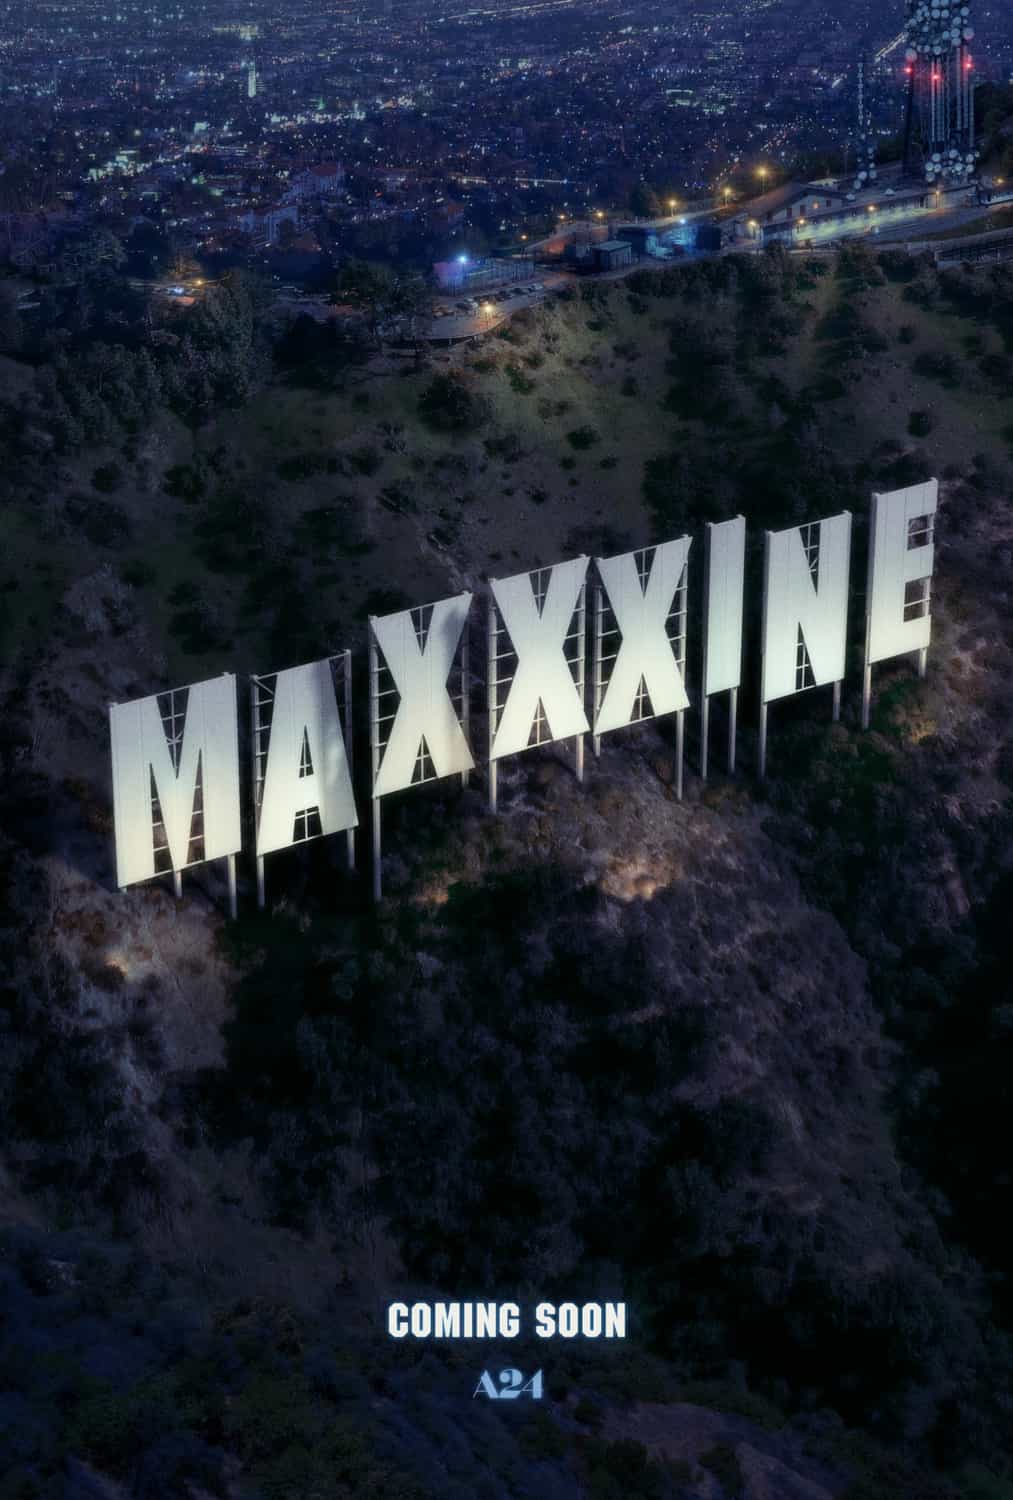 Check out the new trailer and poster for upcoming movie MaXXXine which stars Mia Goth and Elizabeth Debicki - movie UK release date 5th July 2024 #maxxxine